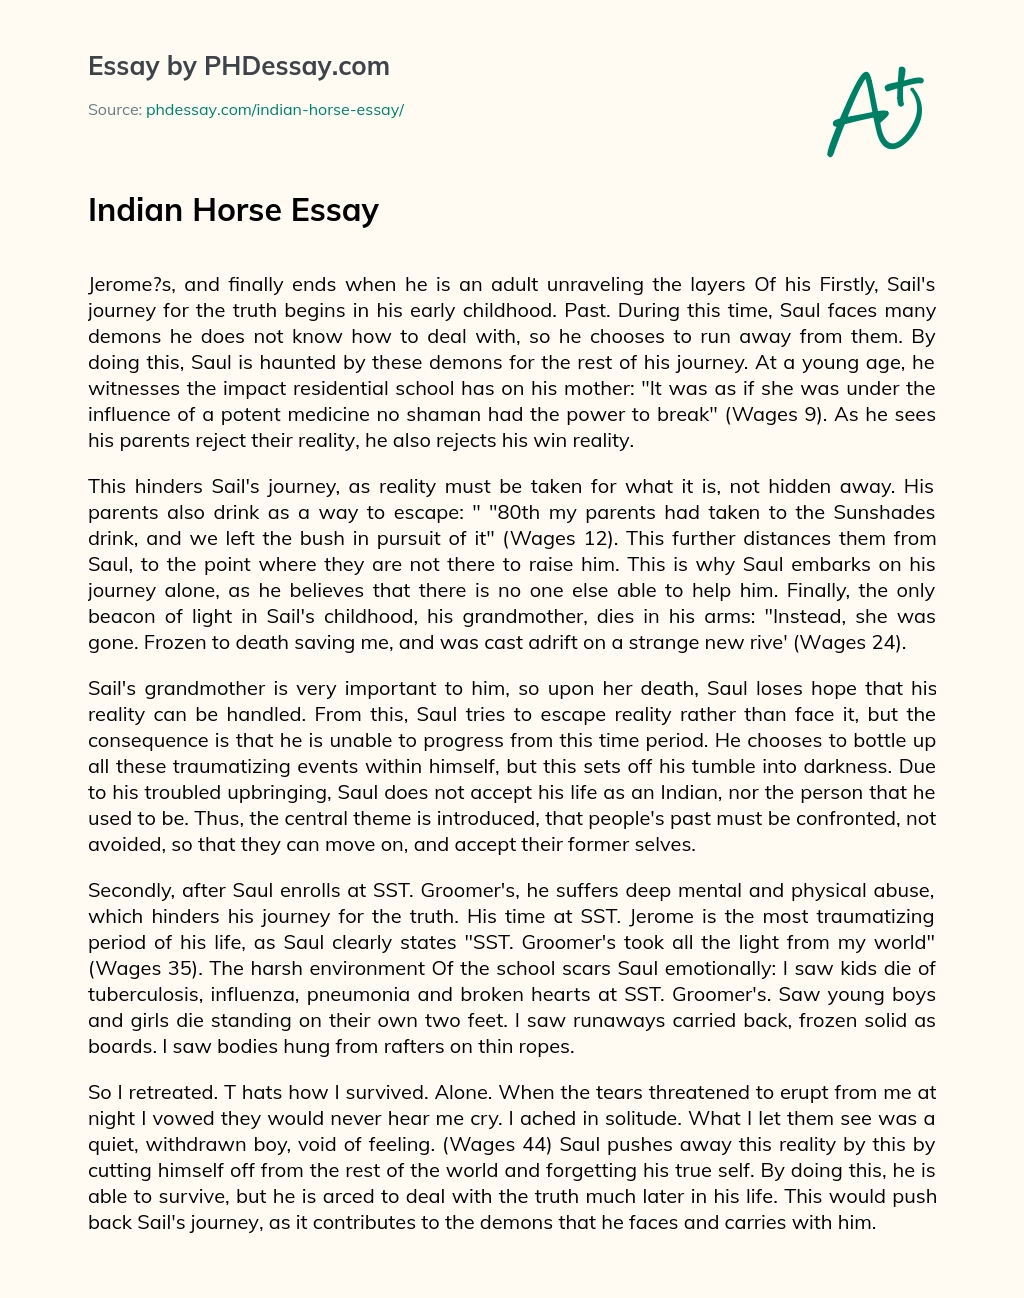 the indian horse essay